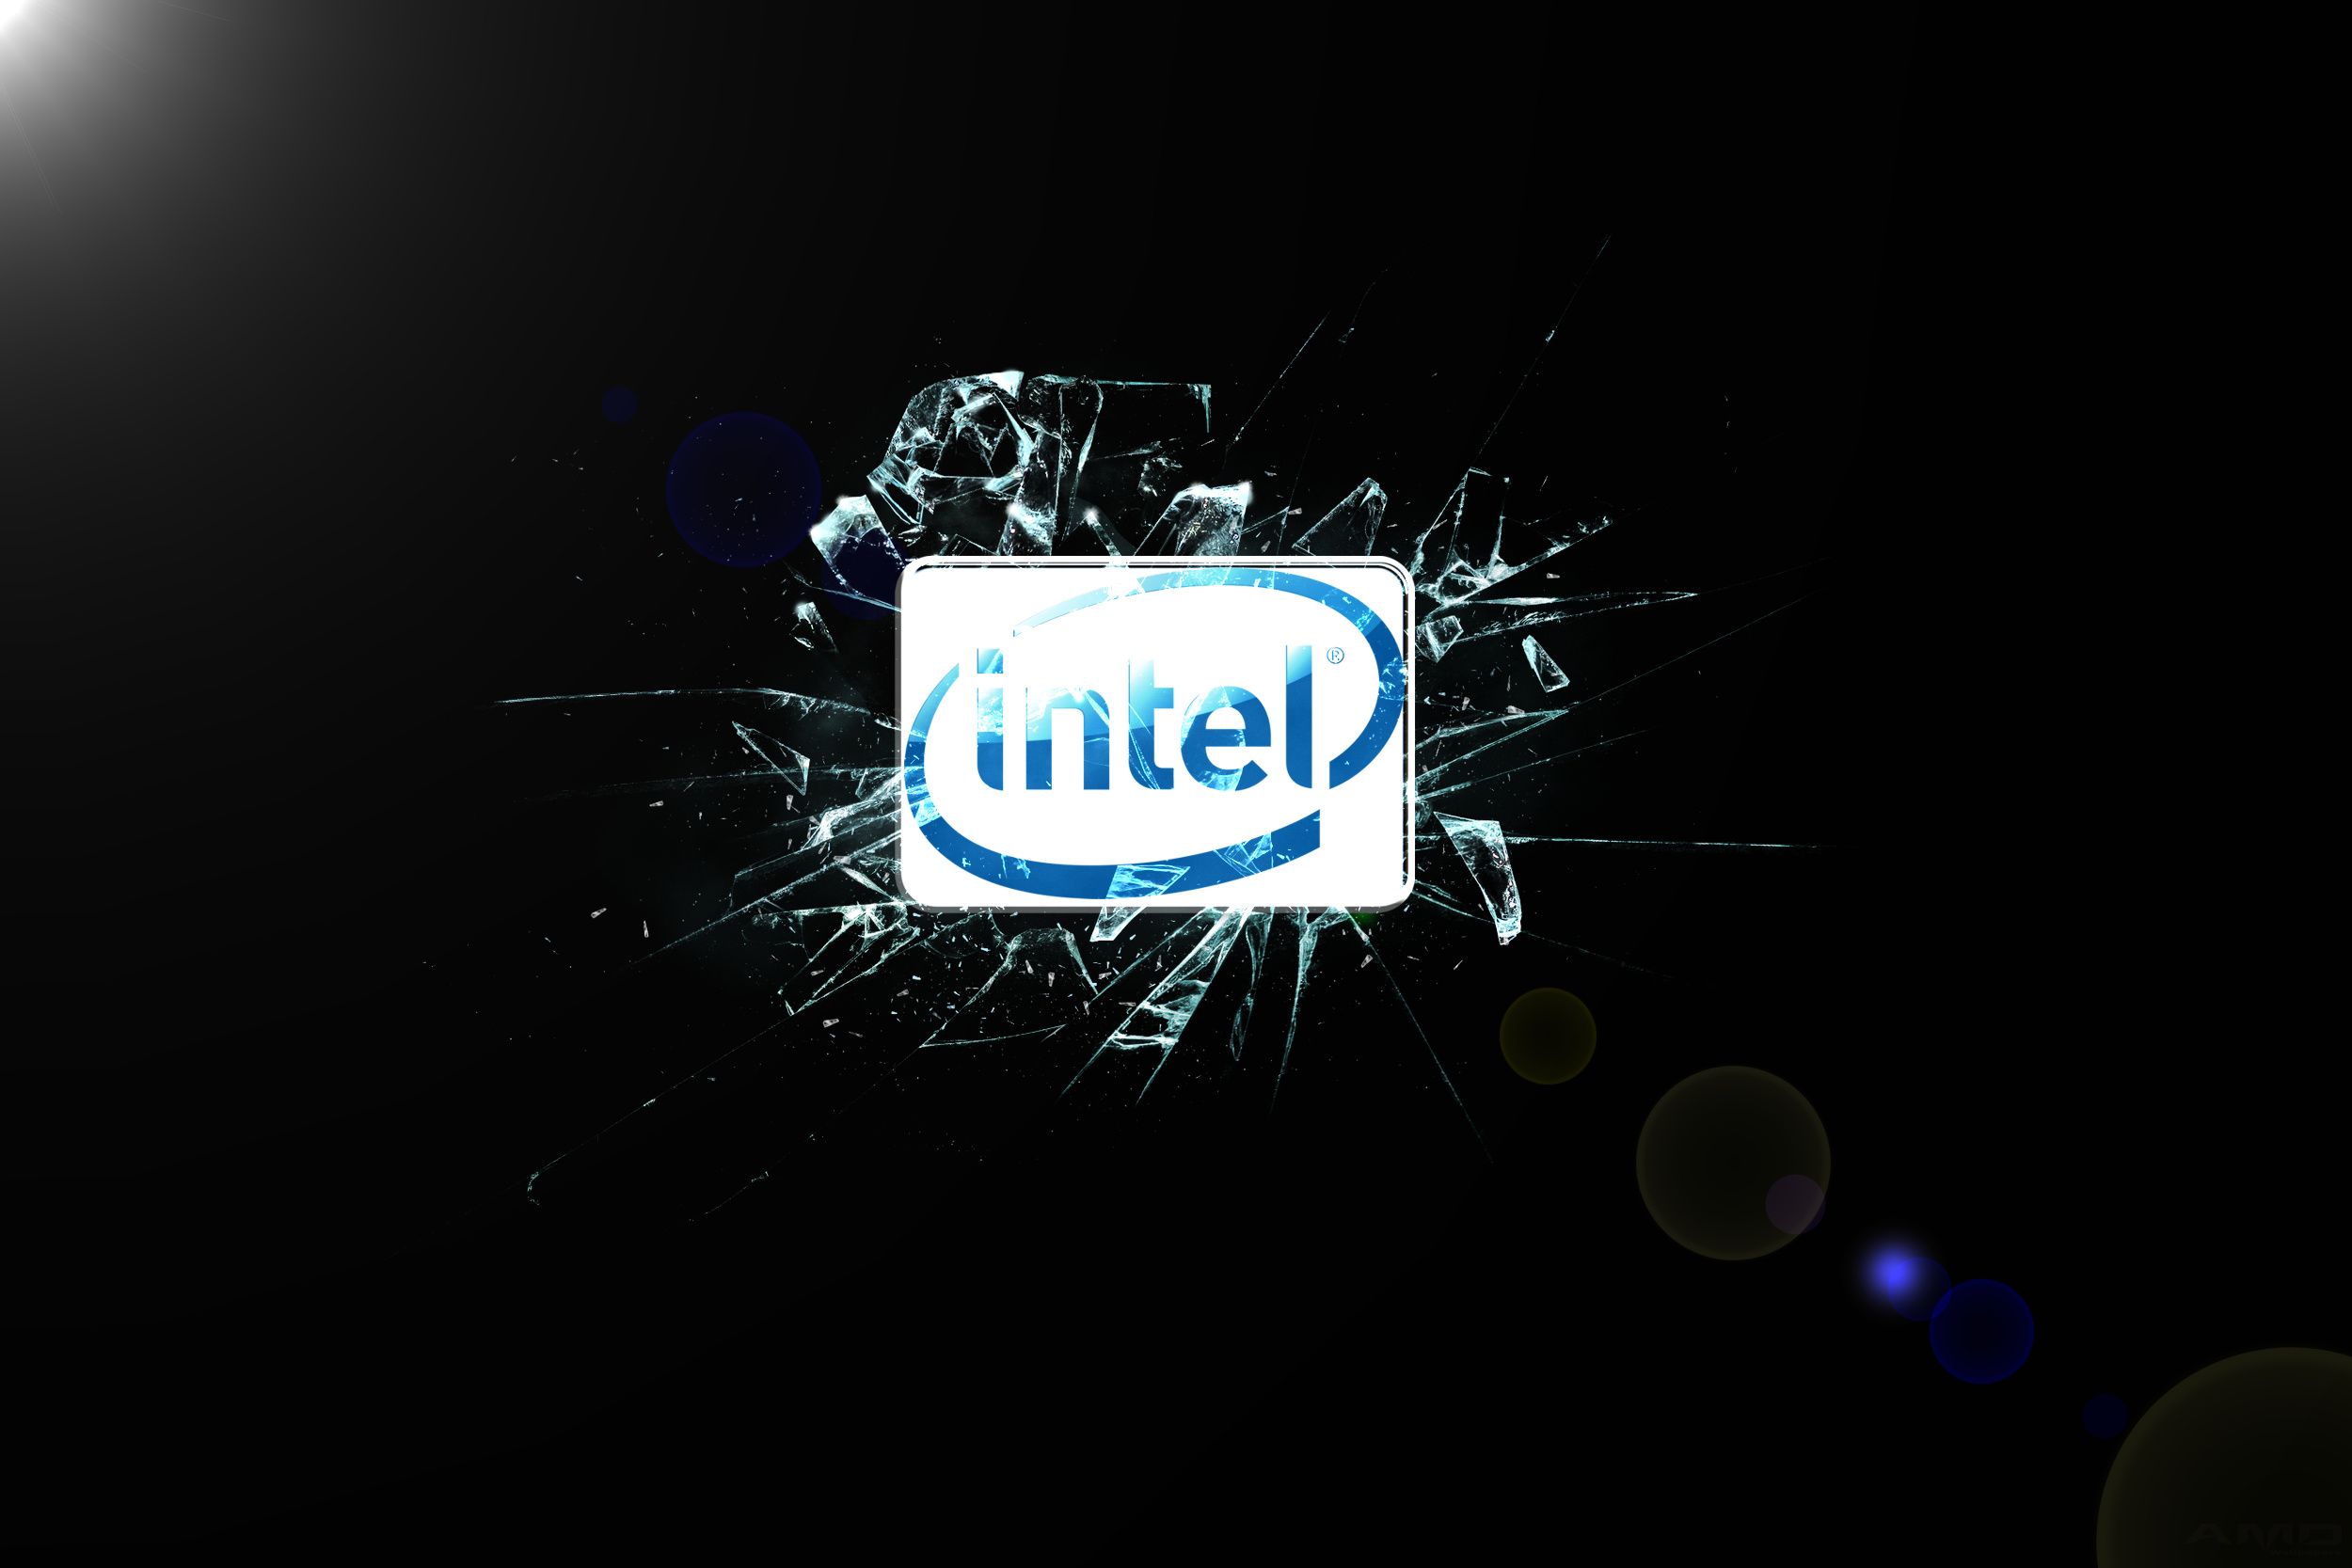 Intel I5 Wallpaper. Intel I5 Wallpaper, I5 Wallpaper and Dell I5 Background